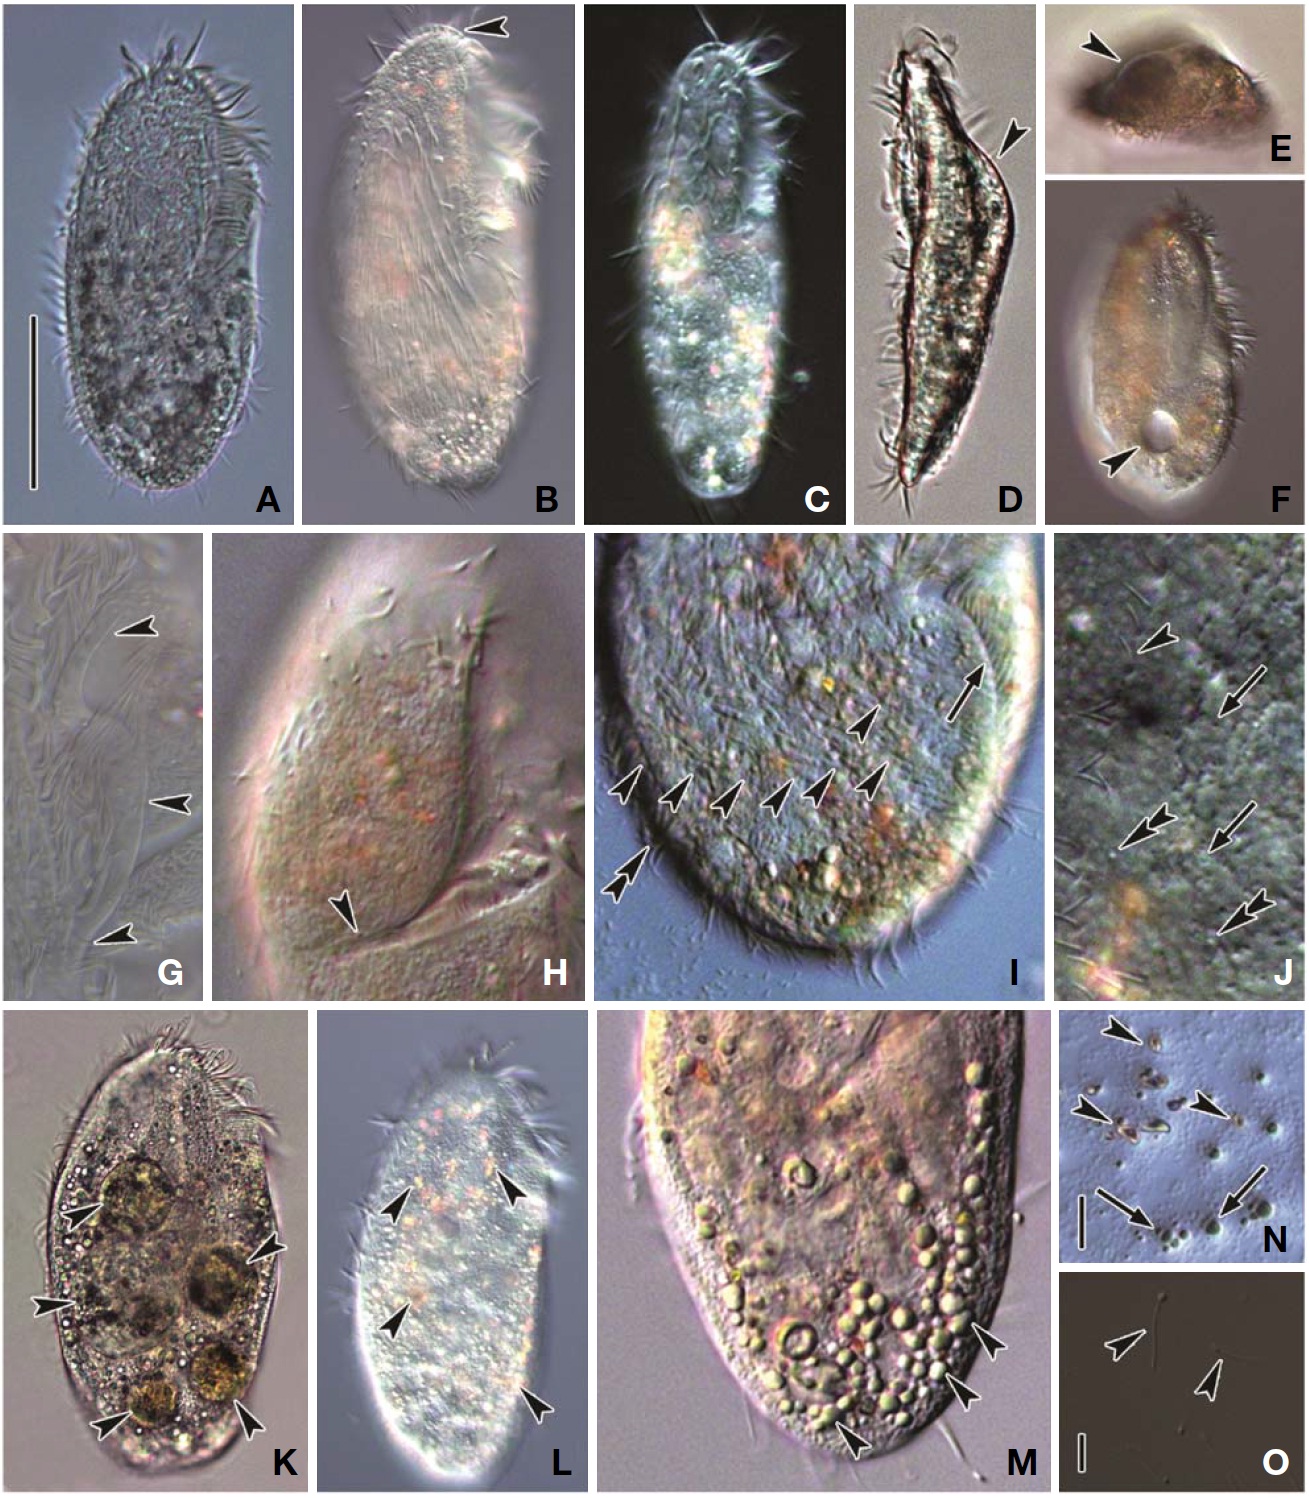 Photomicrographs of Pseudokahliella marina from live specimens. A, Ventral view of typical cell; B, Somatic ciliature and frontal scutum (arrowhead); C, Elongated elliptical body shape; D, E, Ventral side flat while dorsal side convex (arrowheads) from lateral and apical view; F, Contractile vacuole (arrowhead); G, Prominent buccal lip (arrowheads); H, Cytopharynx (arrowhead); I, Left marginal cirri (arrow), frontoventral cirri (arrowheads) and right marginal cirri (double arrowhead); J, Dorsal bristle (arrowhead), cortical granules (double arrowheads) and pore (arrows); K, Food vacuoles (arrowheads); L, Crystals distributed in cell (arrowheads); M, Shining fat globules concentrated on posterior portion (arrowheads); N, Yellowish crystals (arrowheads) and greenish fat globules (arrows); O, Ejected granules (arrowheads). Scale bars: A=50 μm, N, O=5 μm.